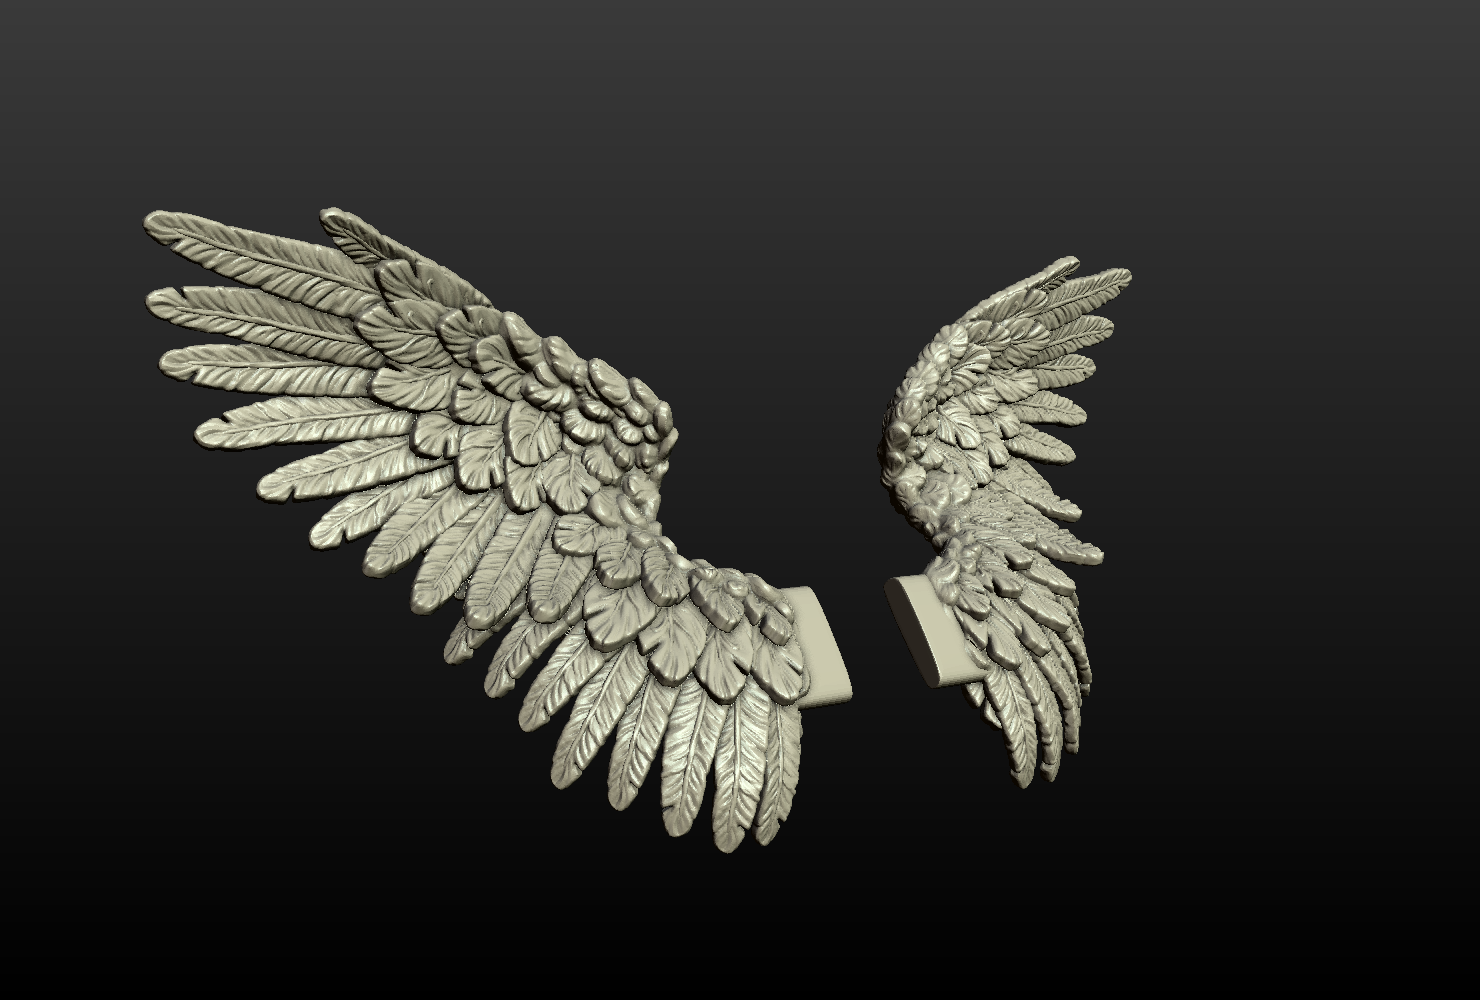 wings 3d software